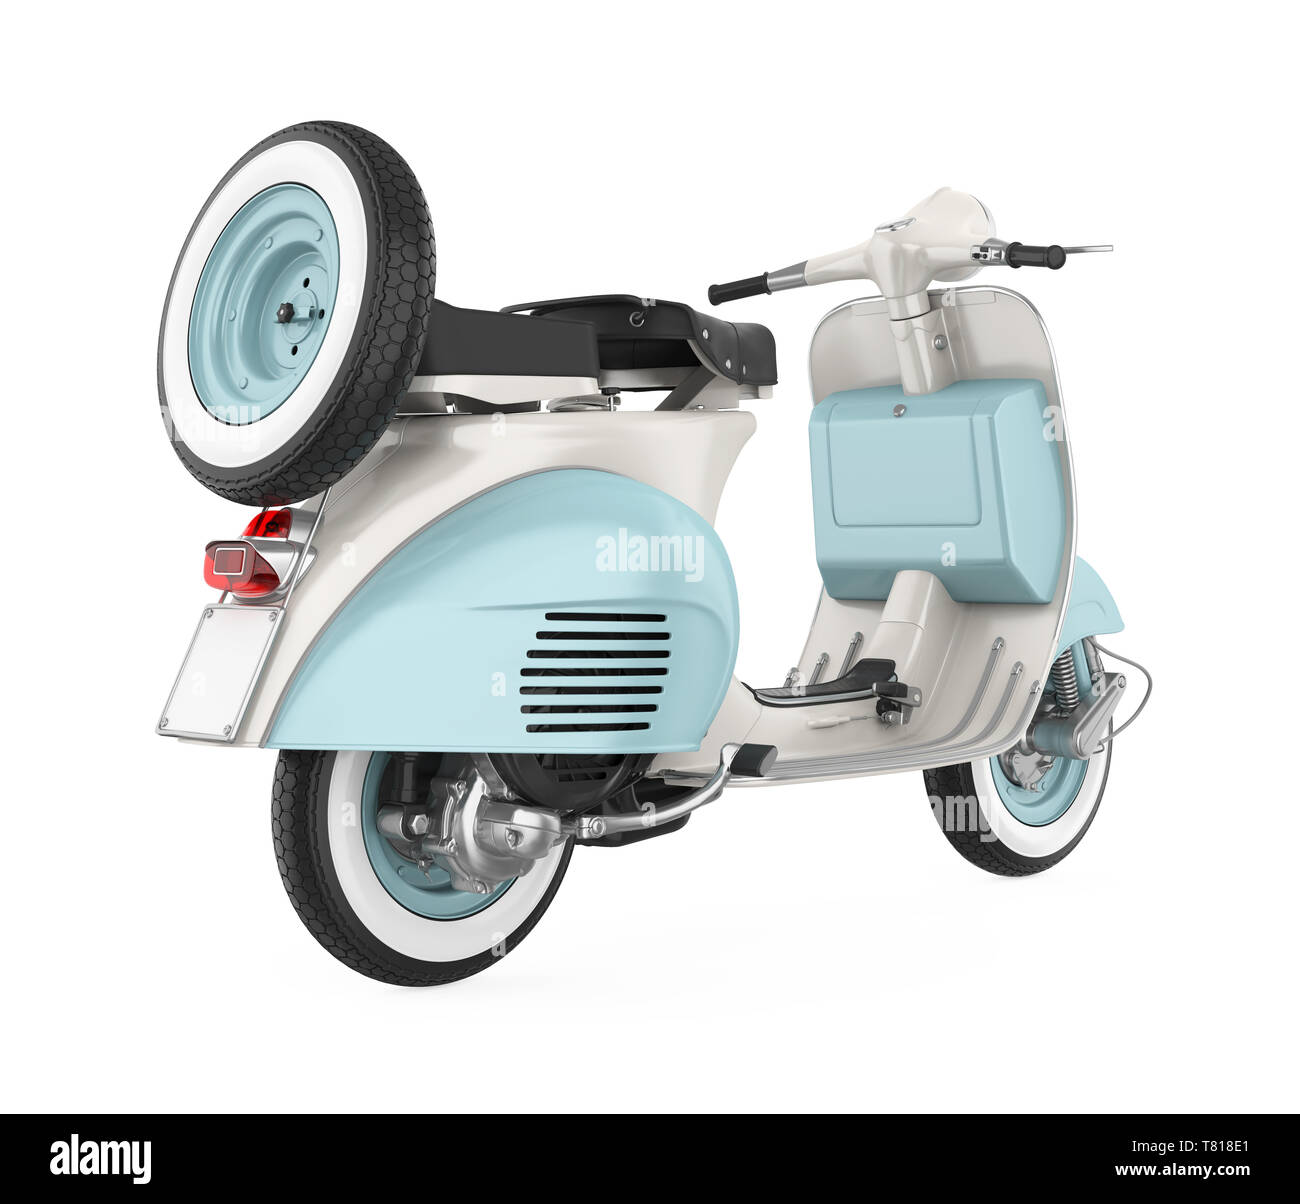 Vintage Scooter Motorcycle Isolated Stock Photo - Alamy